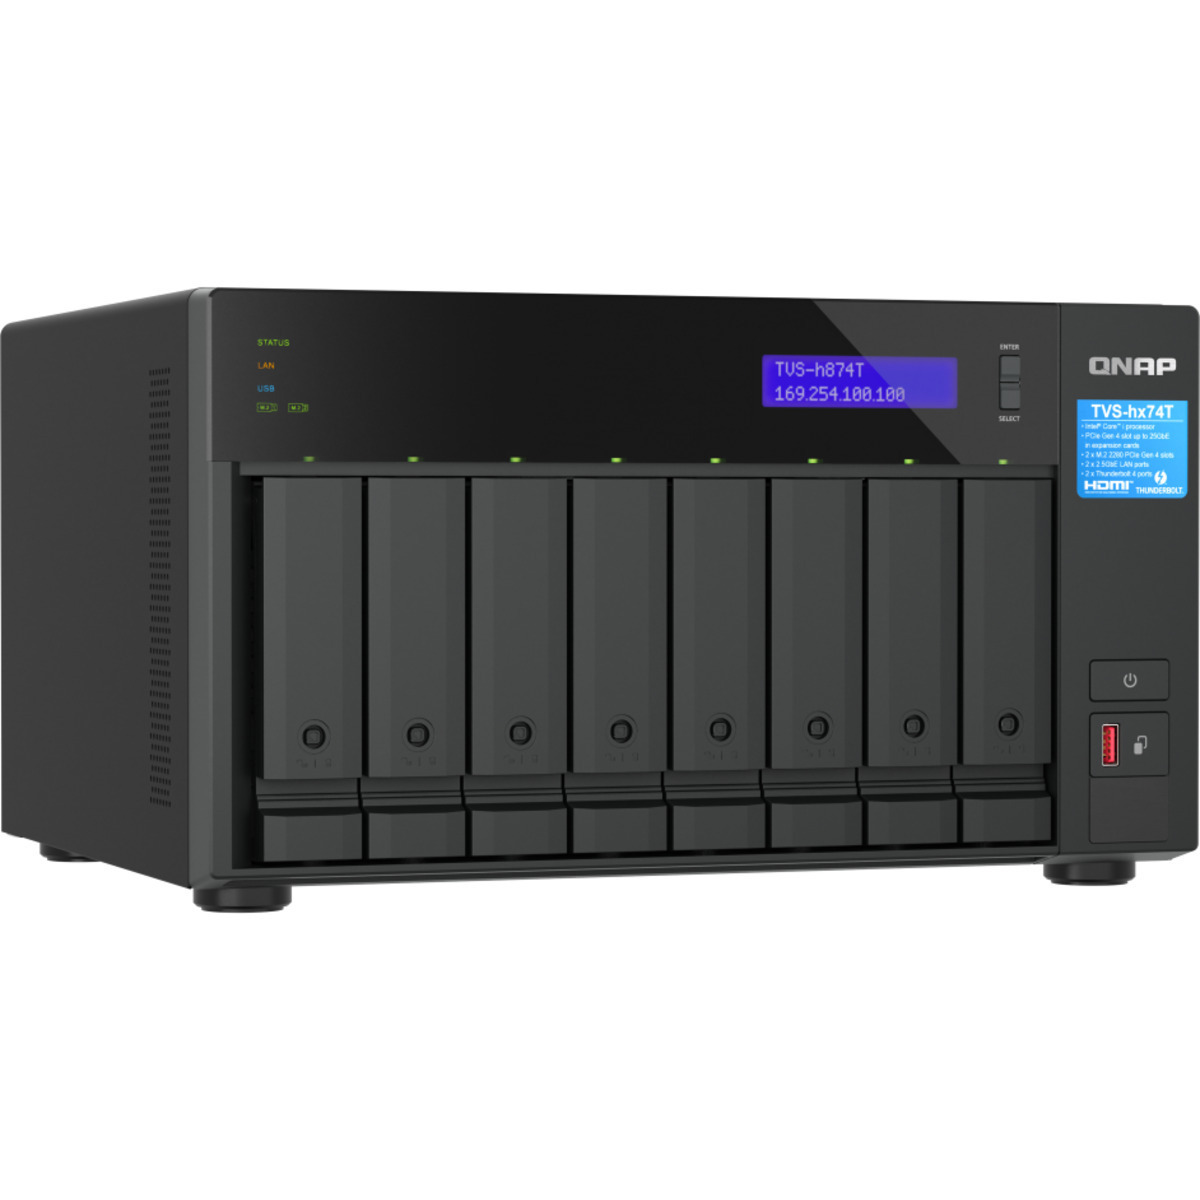 QNAP TVS-h874T Core i9 Thunderbolt 4 144tb 8-Bay Desktop Multimedia / Power User / Business DAS-NAS - Combo Direct + Network Storage Device 6x24tb Western Digital Ultrastar HC580 WUH722424ALE6L4 3.5 7200rpm SATA 6Gb/s HDD ENTERPRISE Class Drives Installed - Burn-In Tested TVS-h874T Core i9 Thunderbolt 4